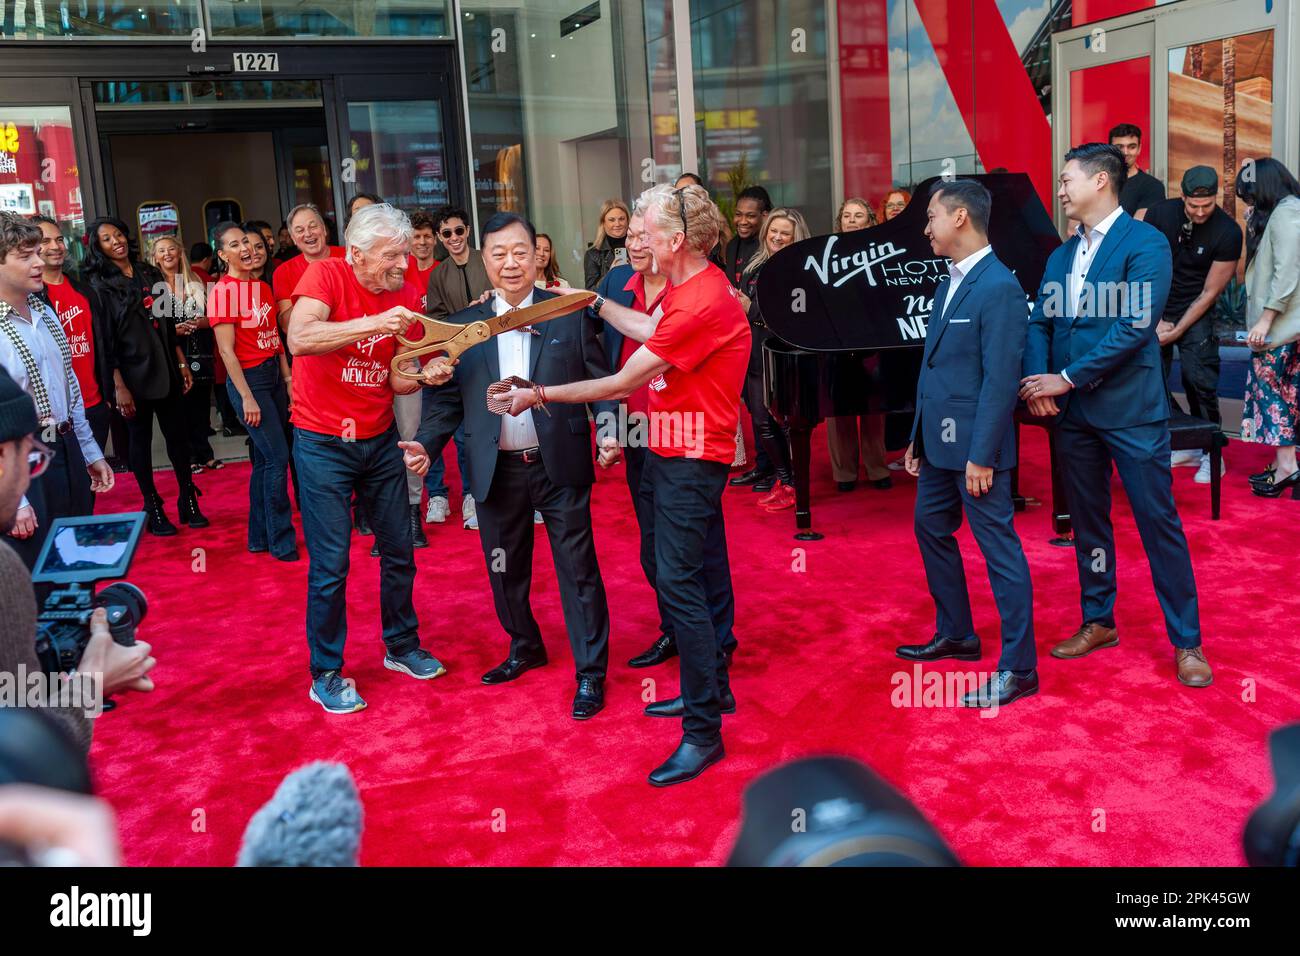 Sir Richard Branson, left, with other executives ceremoniously cuts the tie of John Lam of the The Lam Group at the Grand Opening of the Virgin Hotel New York in the NoMad neighborhood on Tuesday, April 4, 2023. (© Richard B. Levine) Stock Photo